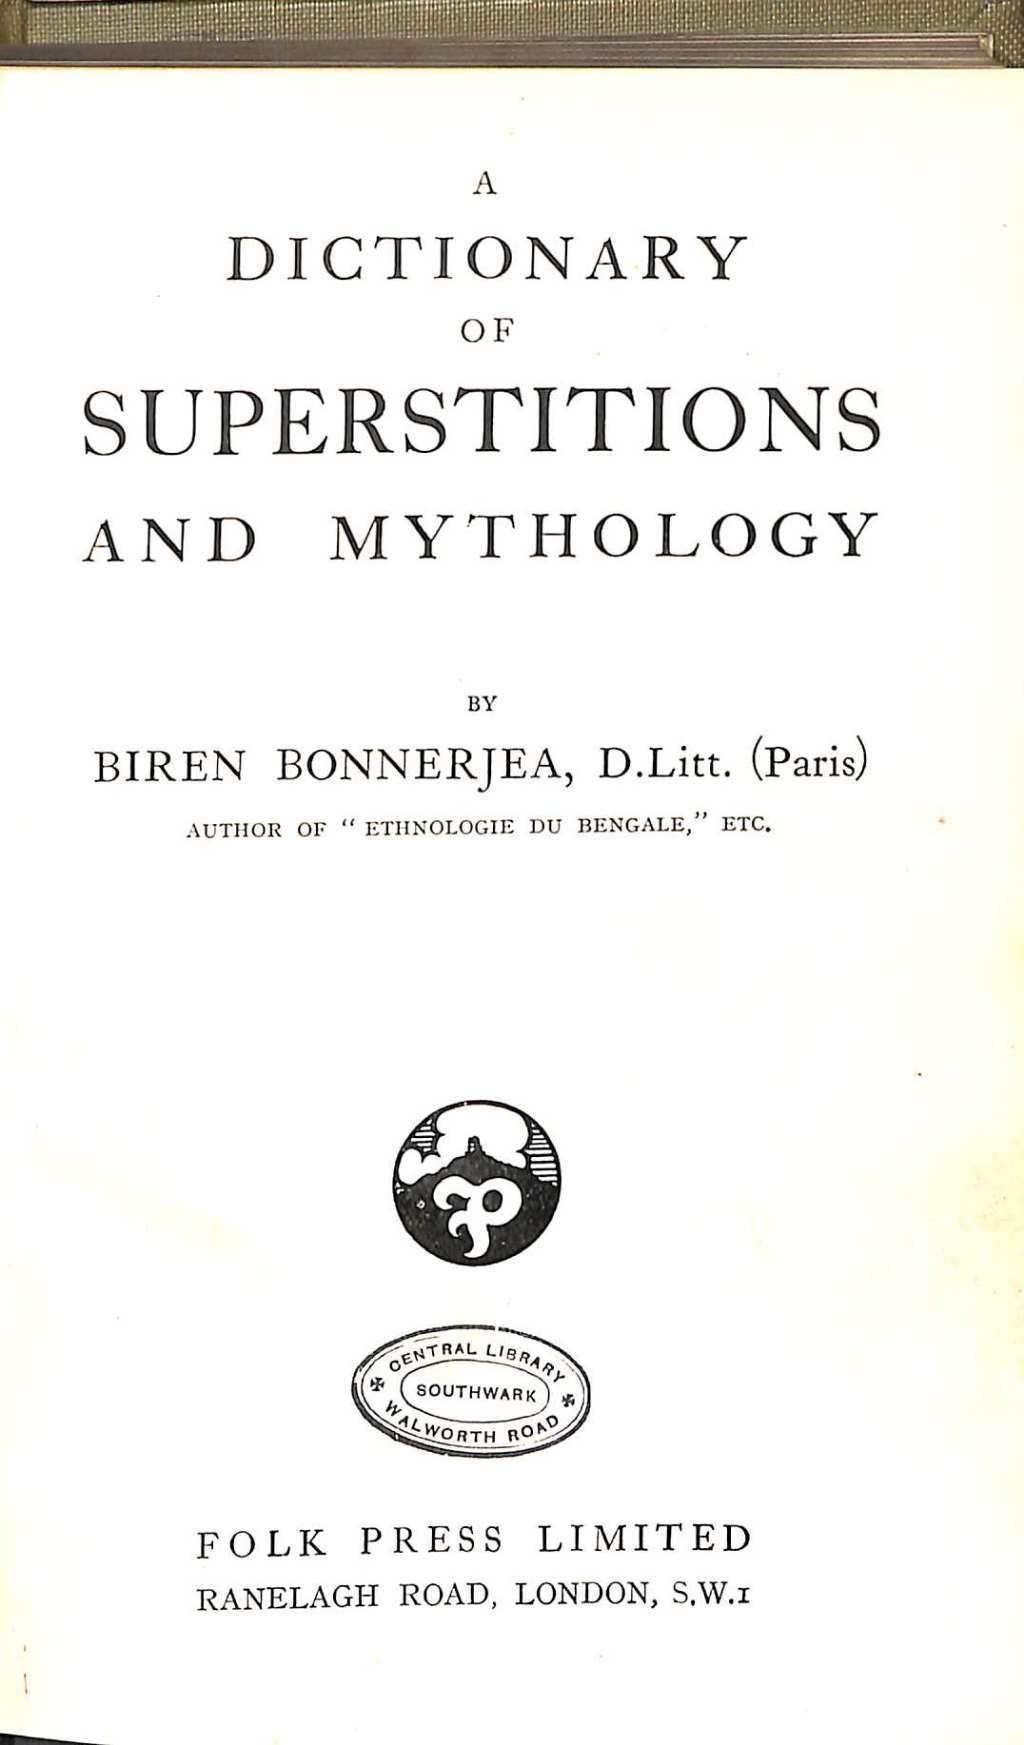 A Dictionary of Superstitions and Mythology